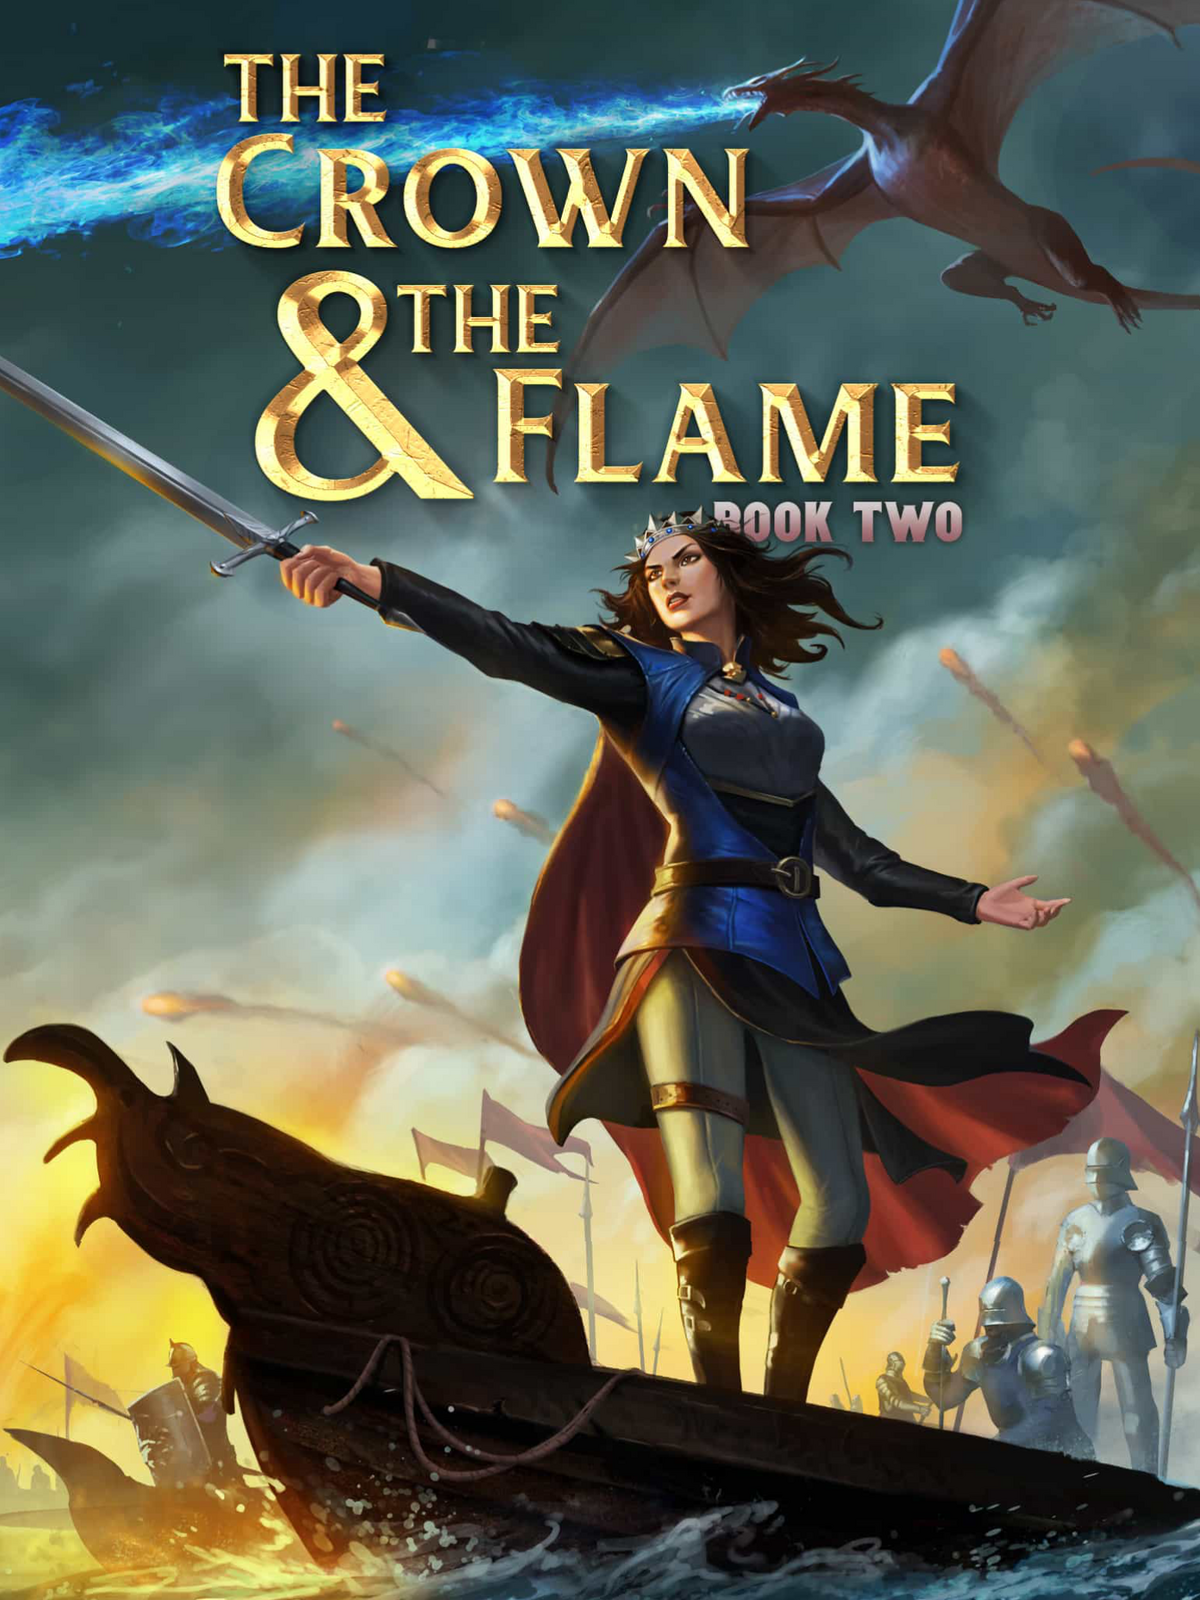 the-crown-the-flame-book-2-choices-choices-stories-you-play-wiki-fandom